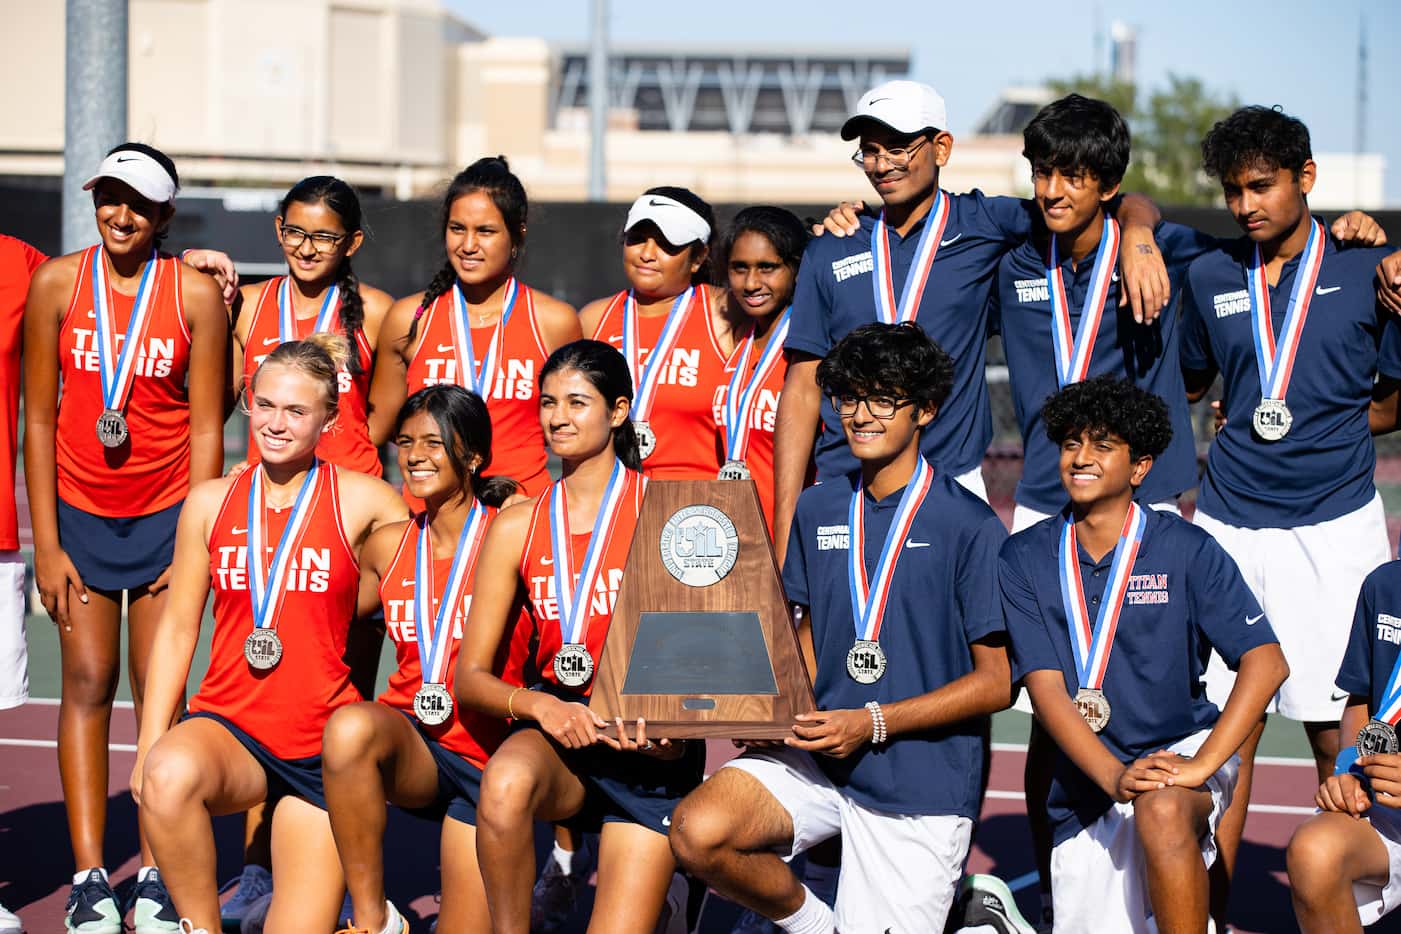 Members of the Frisco Centennial tennis team pose for a group photo at the conclusion of the...